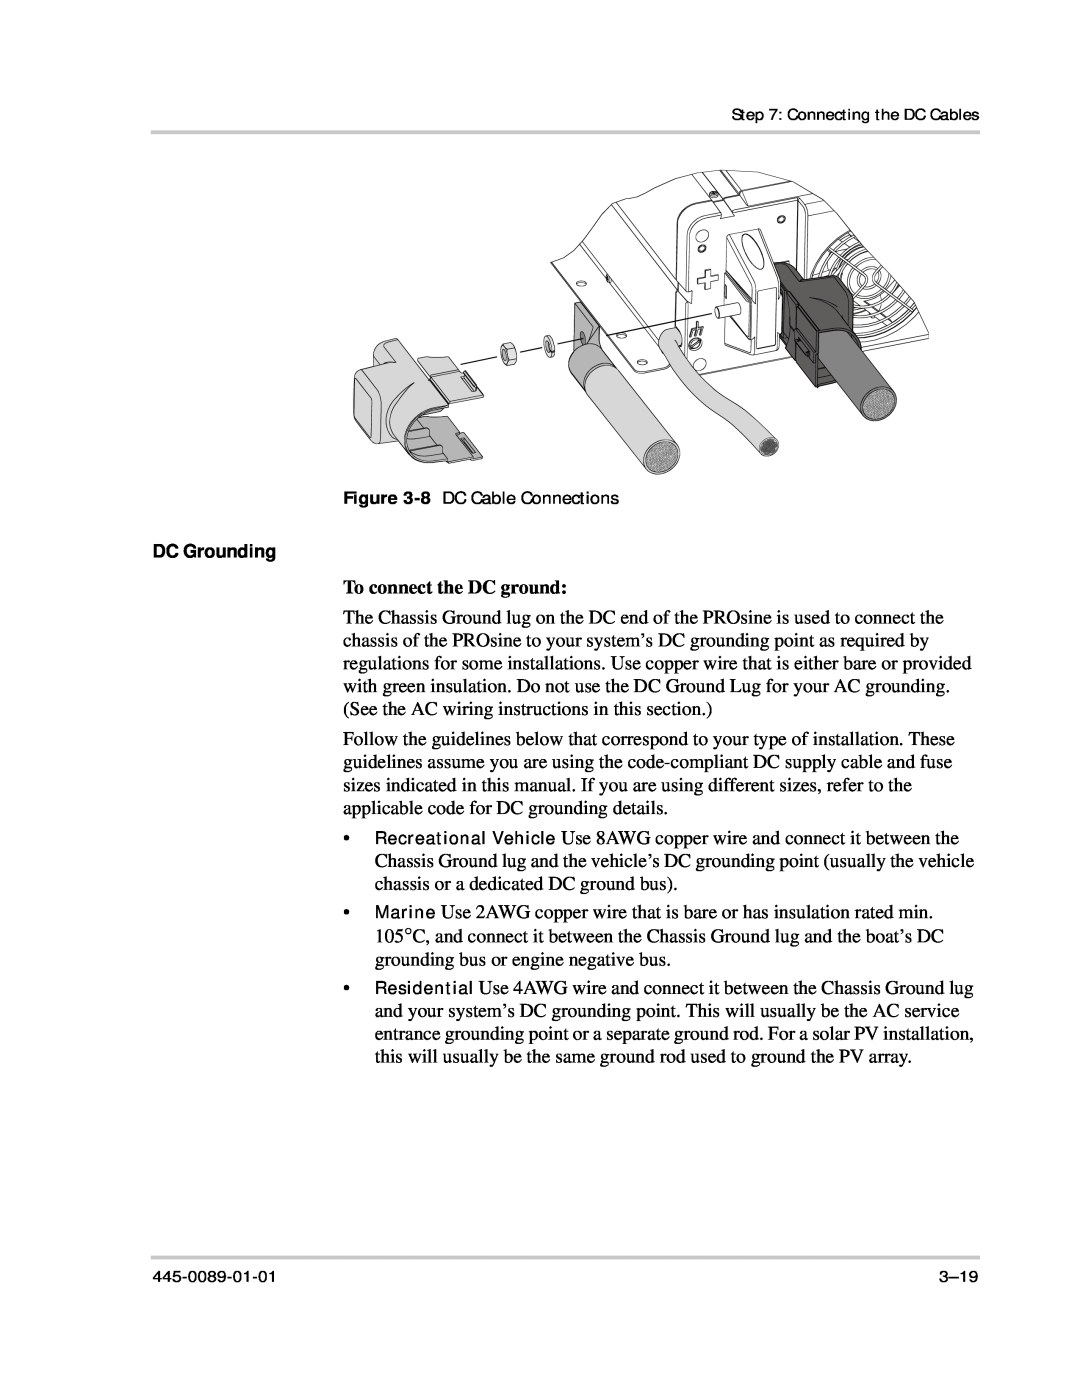 Xantrex Technology PROsine 2.0 user manual DC Grounding, To connect the DC ground 